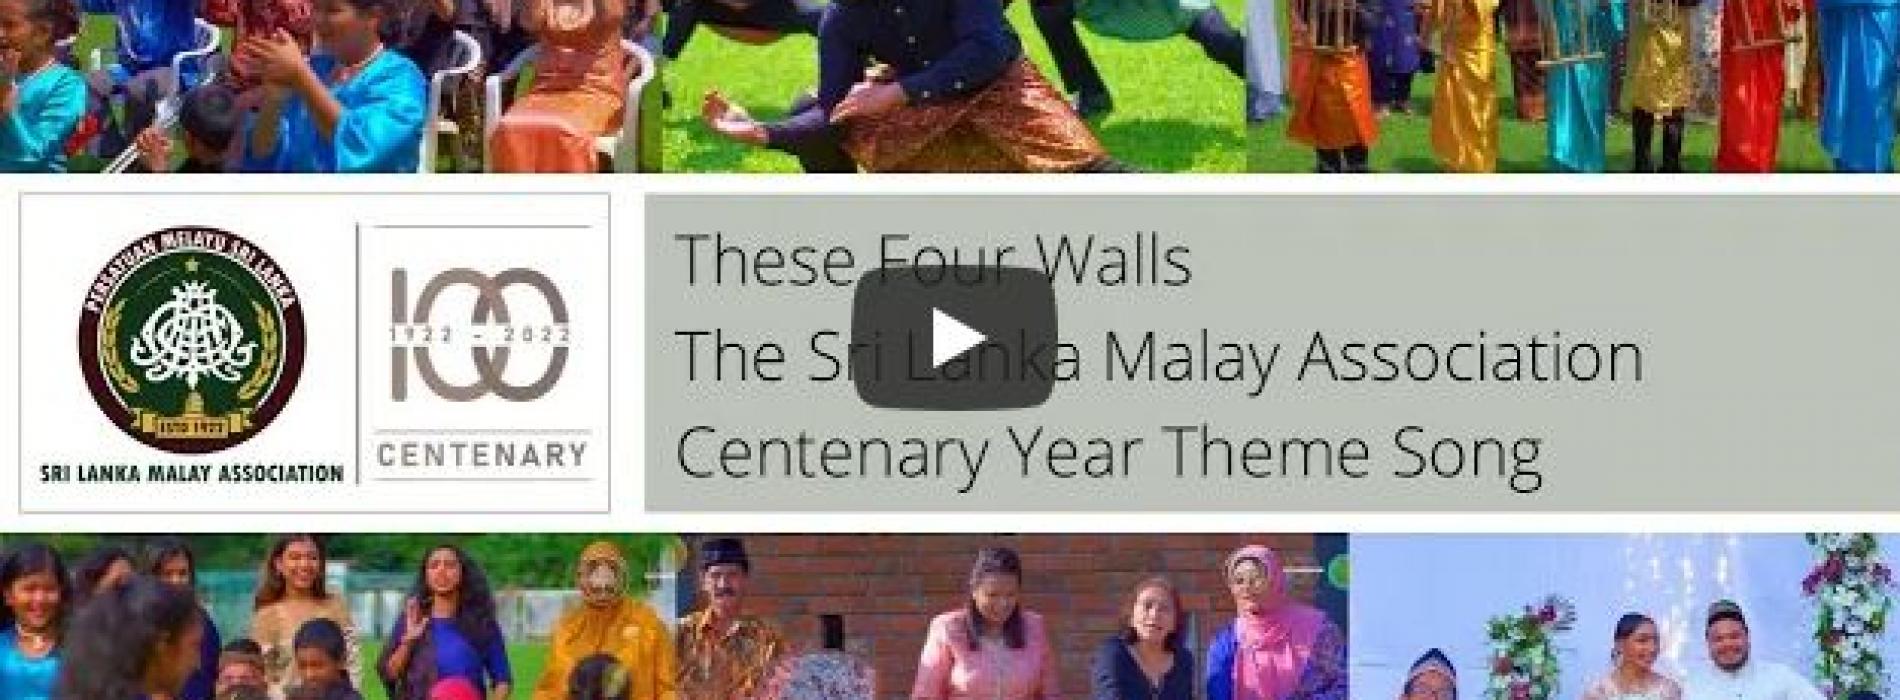 New Music : These Four Walls | The Official Sri Lanka Malay Association Centenary Year Theme Song